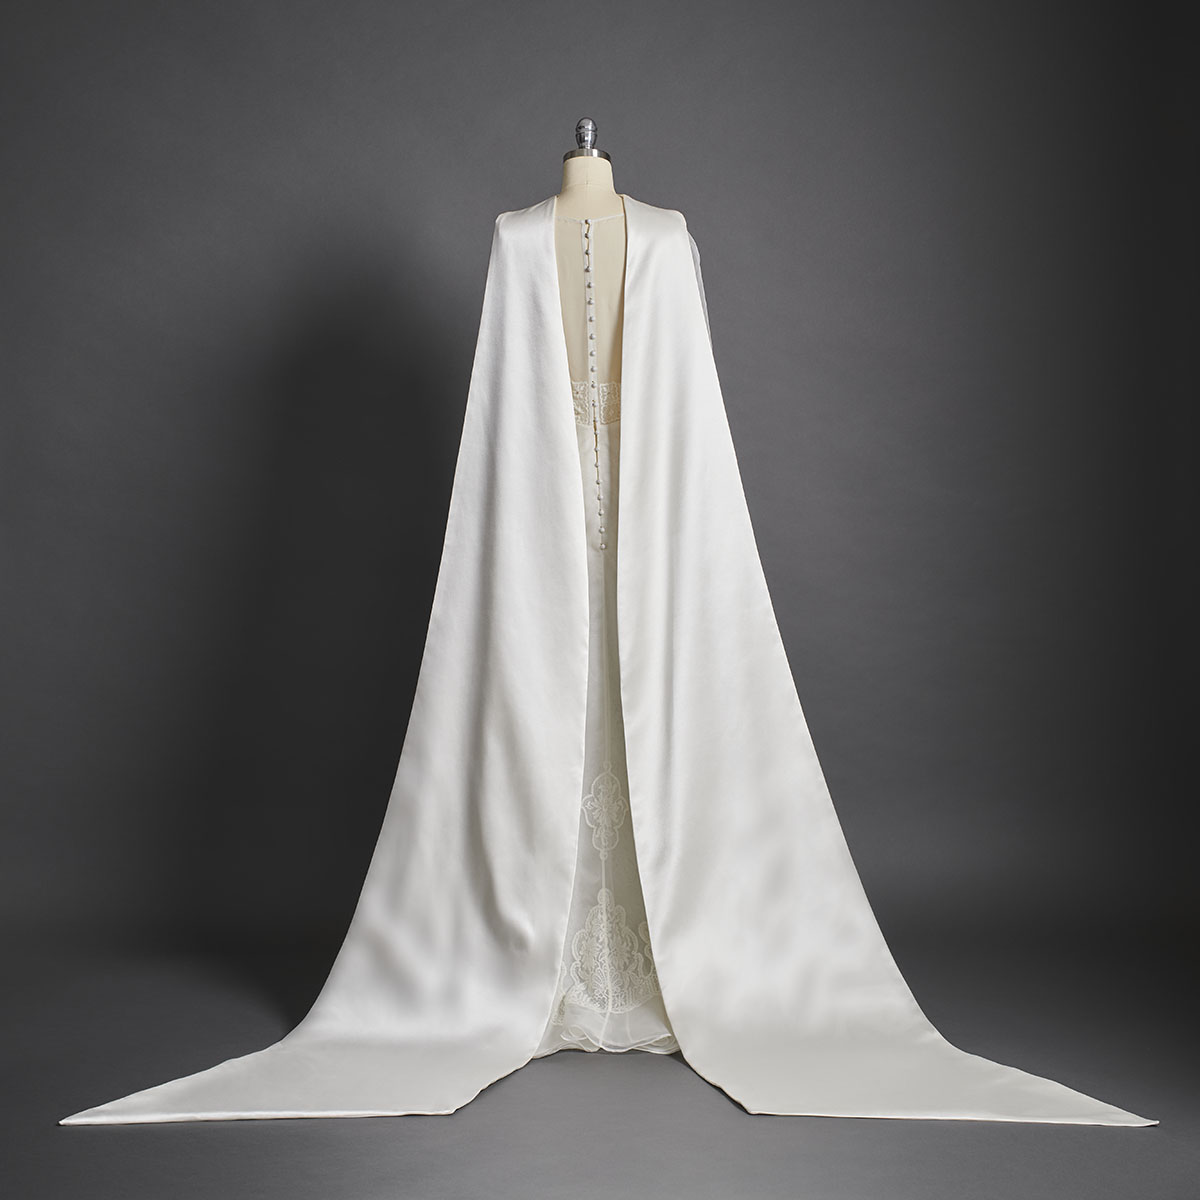 Composed of fine silk organza, this wedding dress is inspired by the light and enchantment of the magnificent crystal chandeliers that illuminate the Palais Garnier. Hand-stitched French lace has been used to create intricate motifs on the dress, while the long train is made of a heavy silk satin. - DELPHINE GENIN